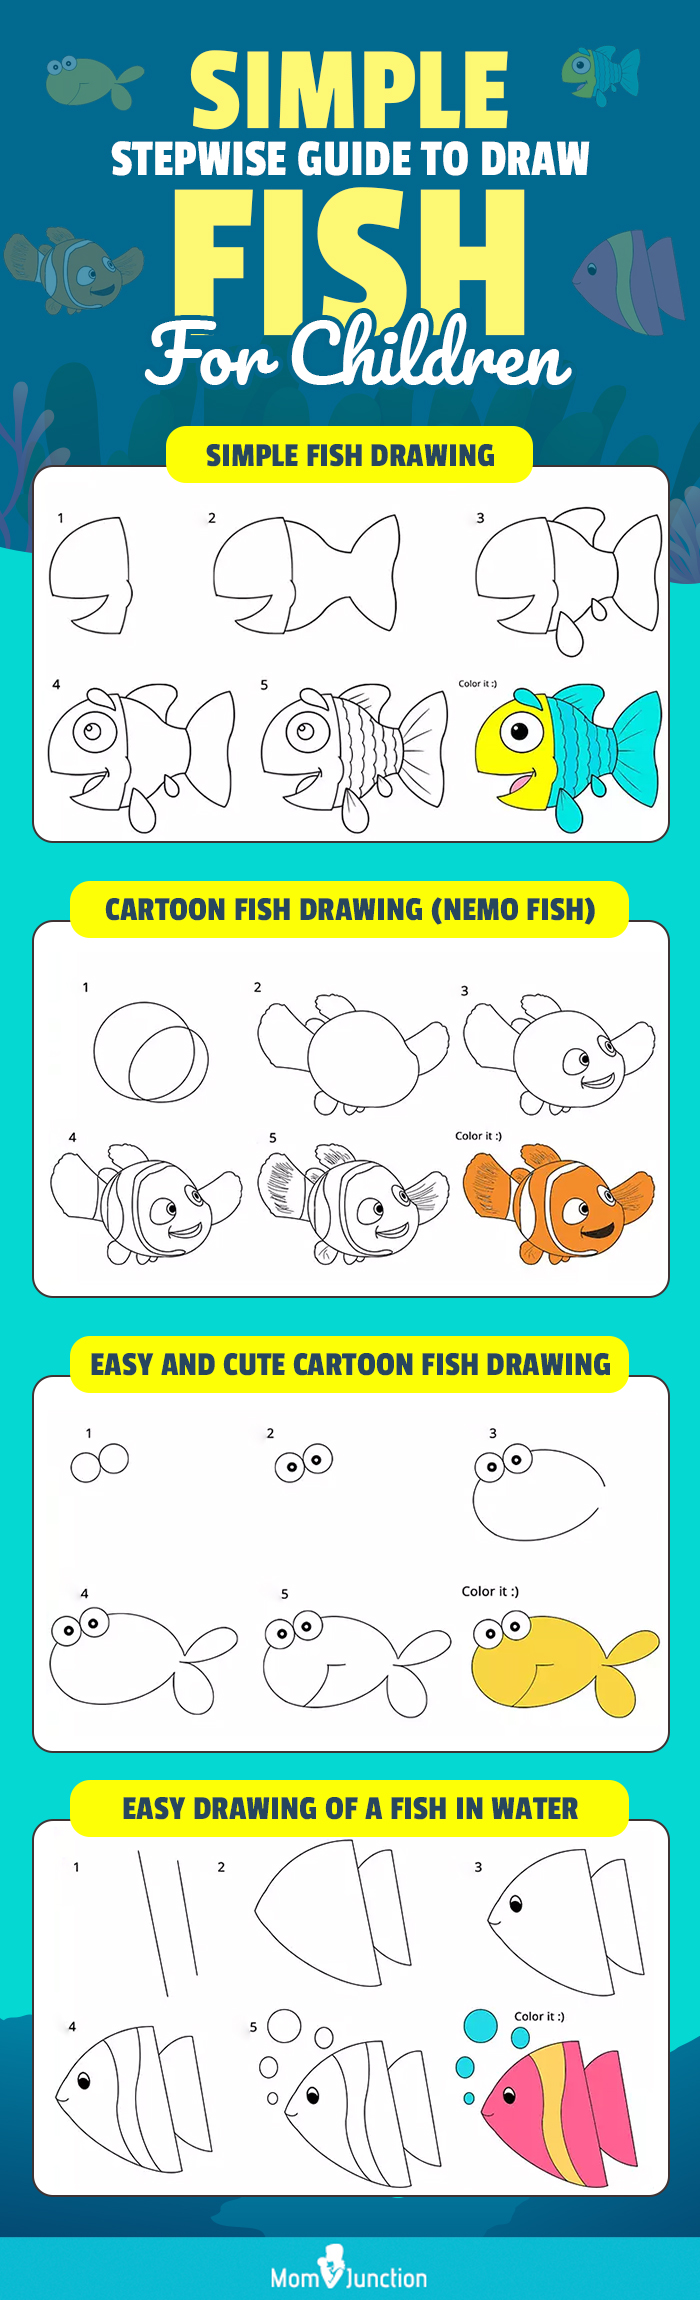 simple stepwise guide to draw fish for children (infographic)